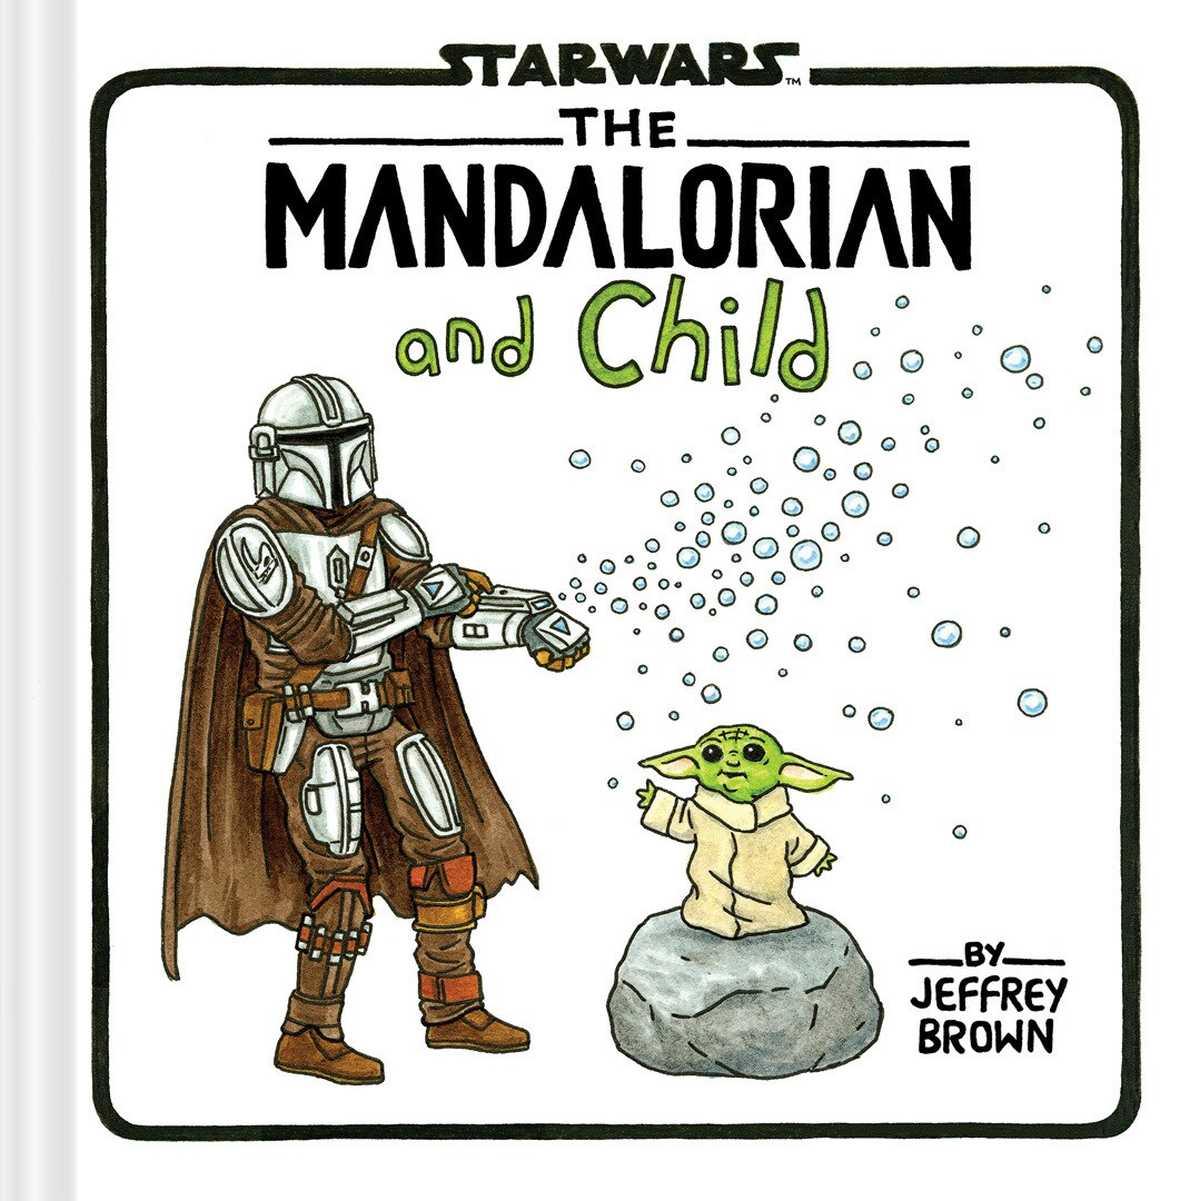 the-mandalorian-and-child-cover.jpg